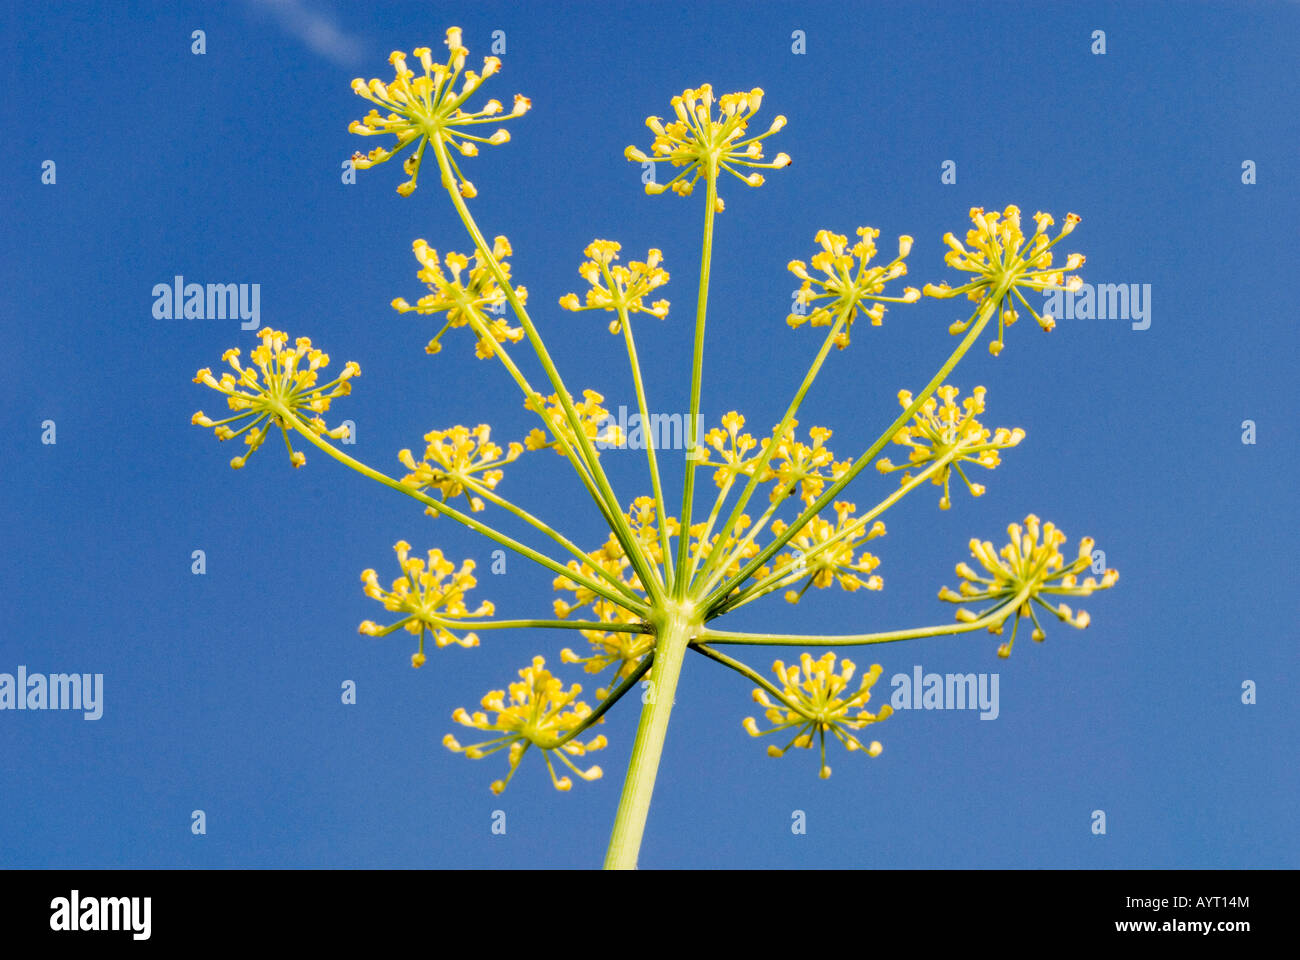 Fennel flower in front of a blue sky (Foeniculum vulgare) Stock Photo